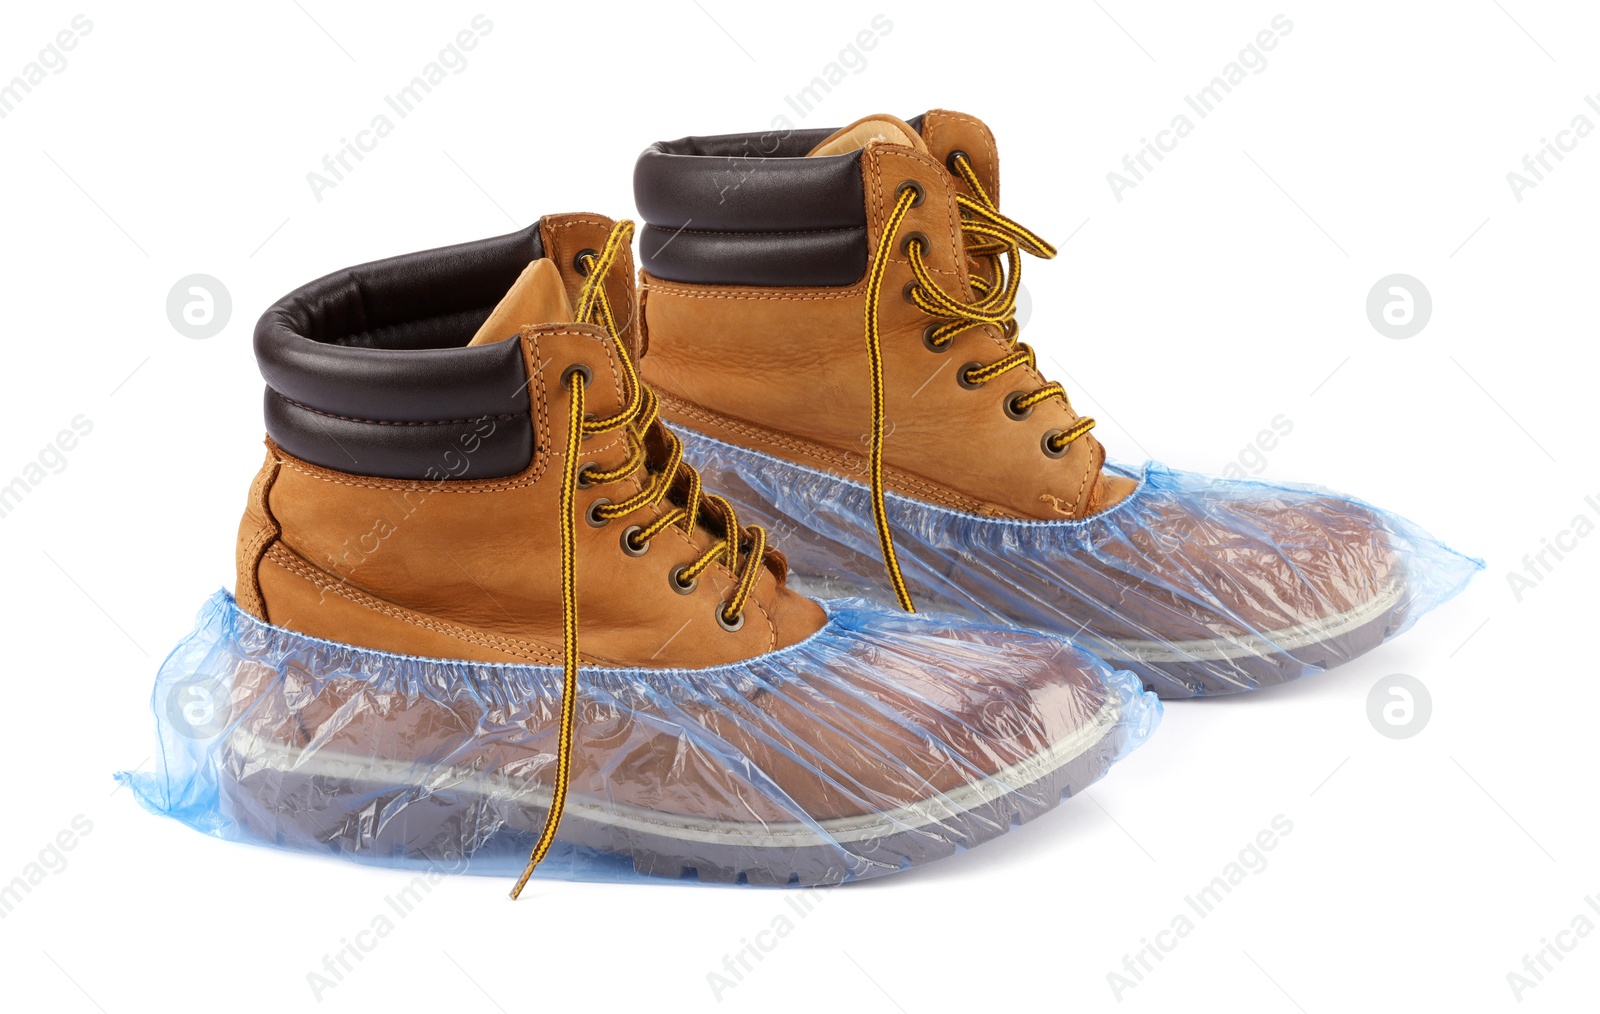 Photo of Boots in blue shoe covers isolated on white